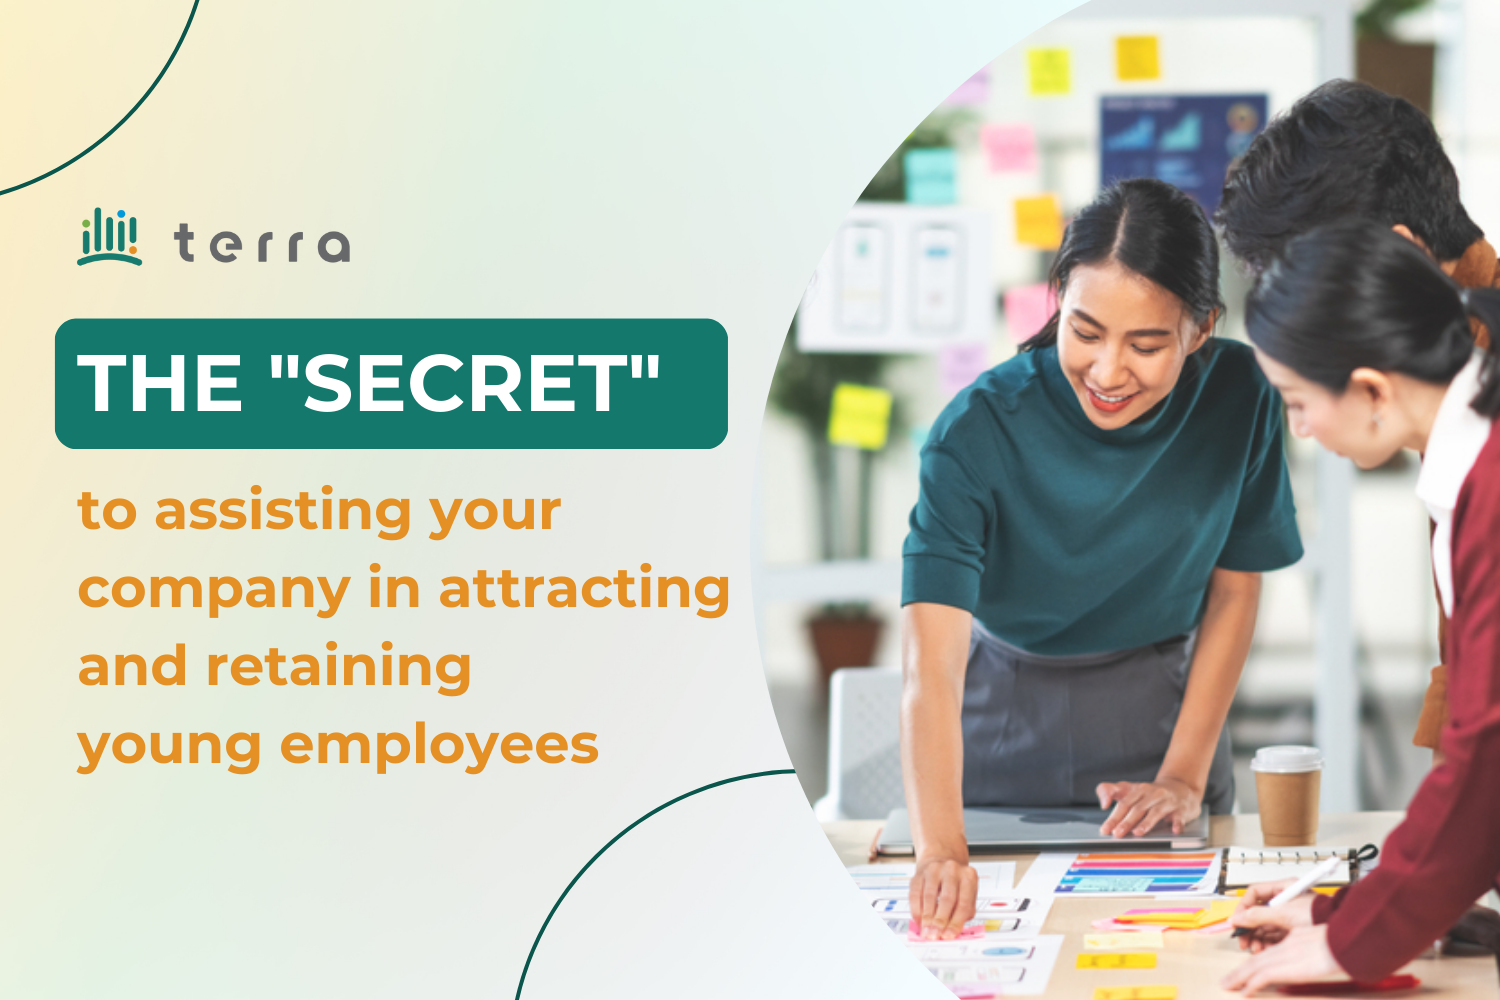 The “secret” to assisting your company in attracting and retaining young employees